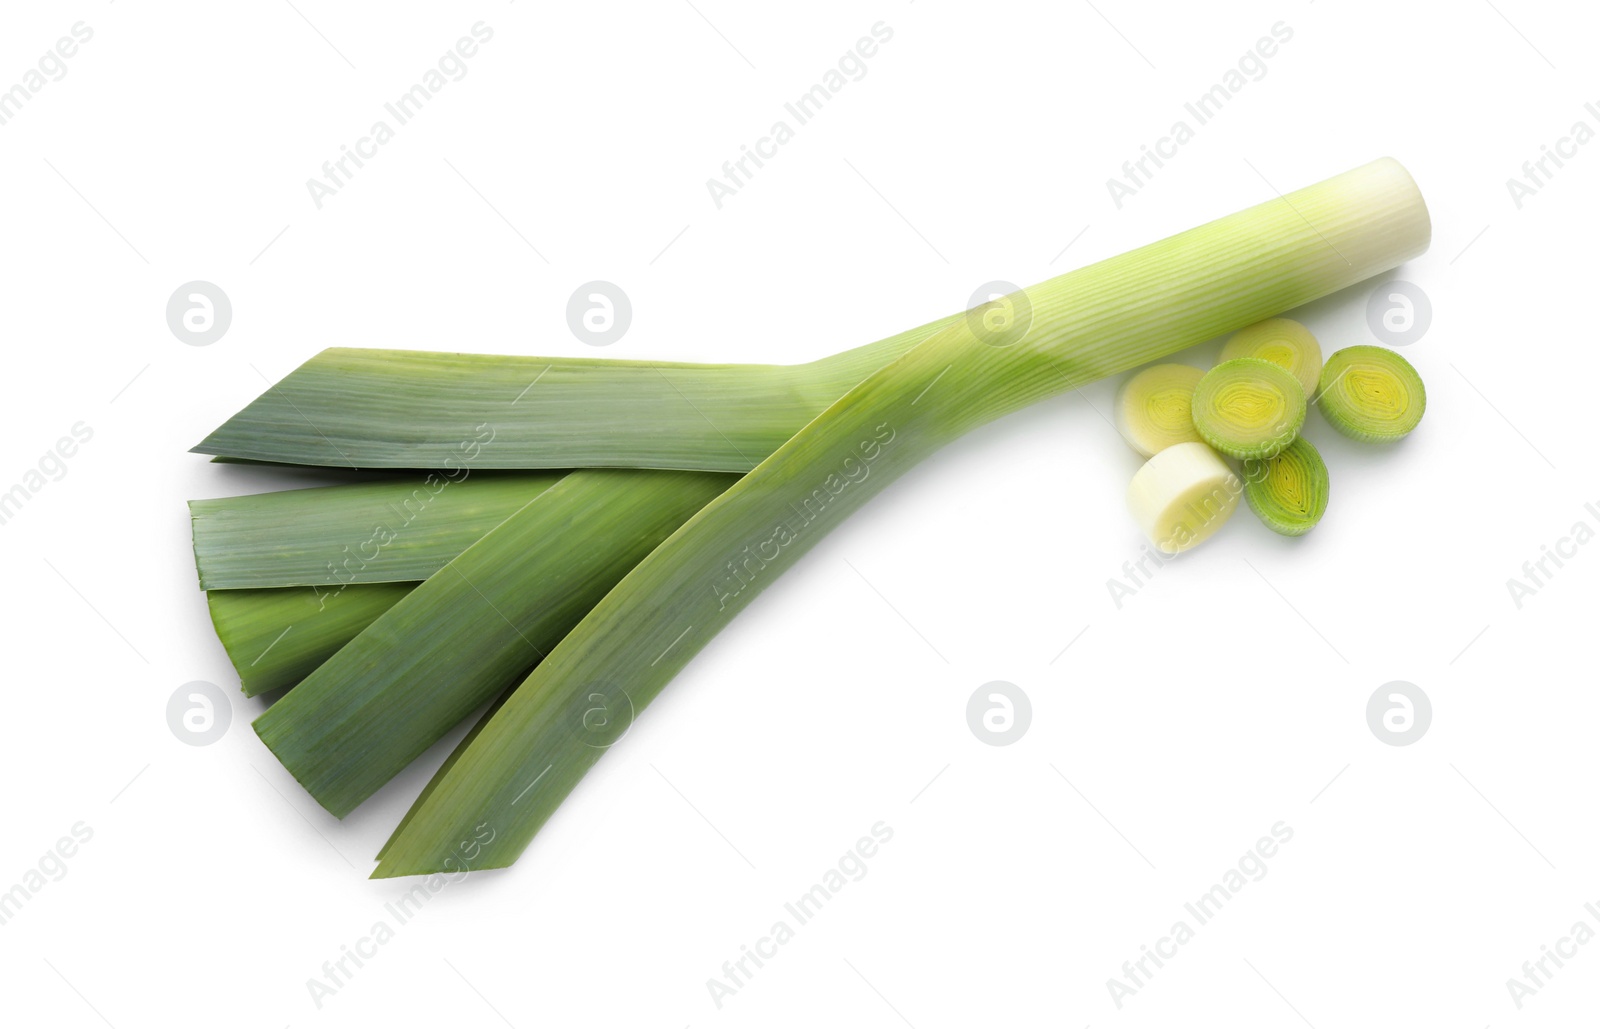 Photo of Whole and cut fresh leeks on white background, top view